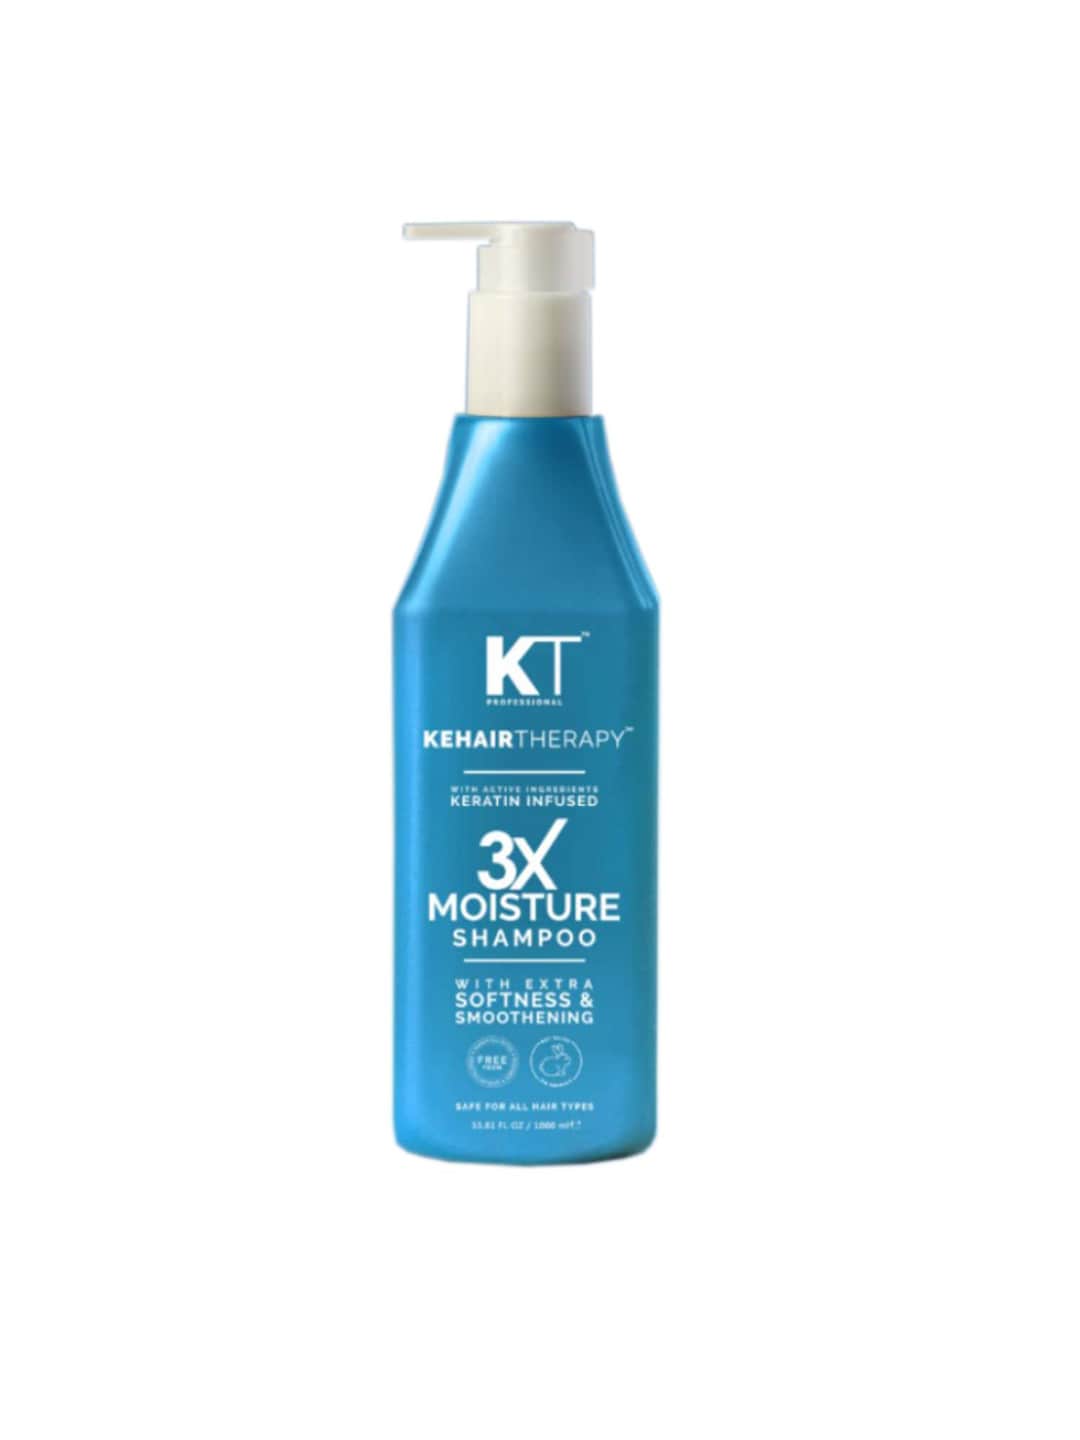 KEHAIRTHERAPY Keratin Infused 3X Moisture Shampoo with Extra Softness - 1000 ml Price in India